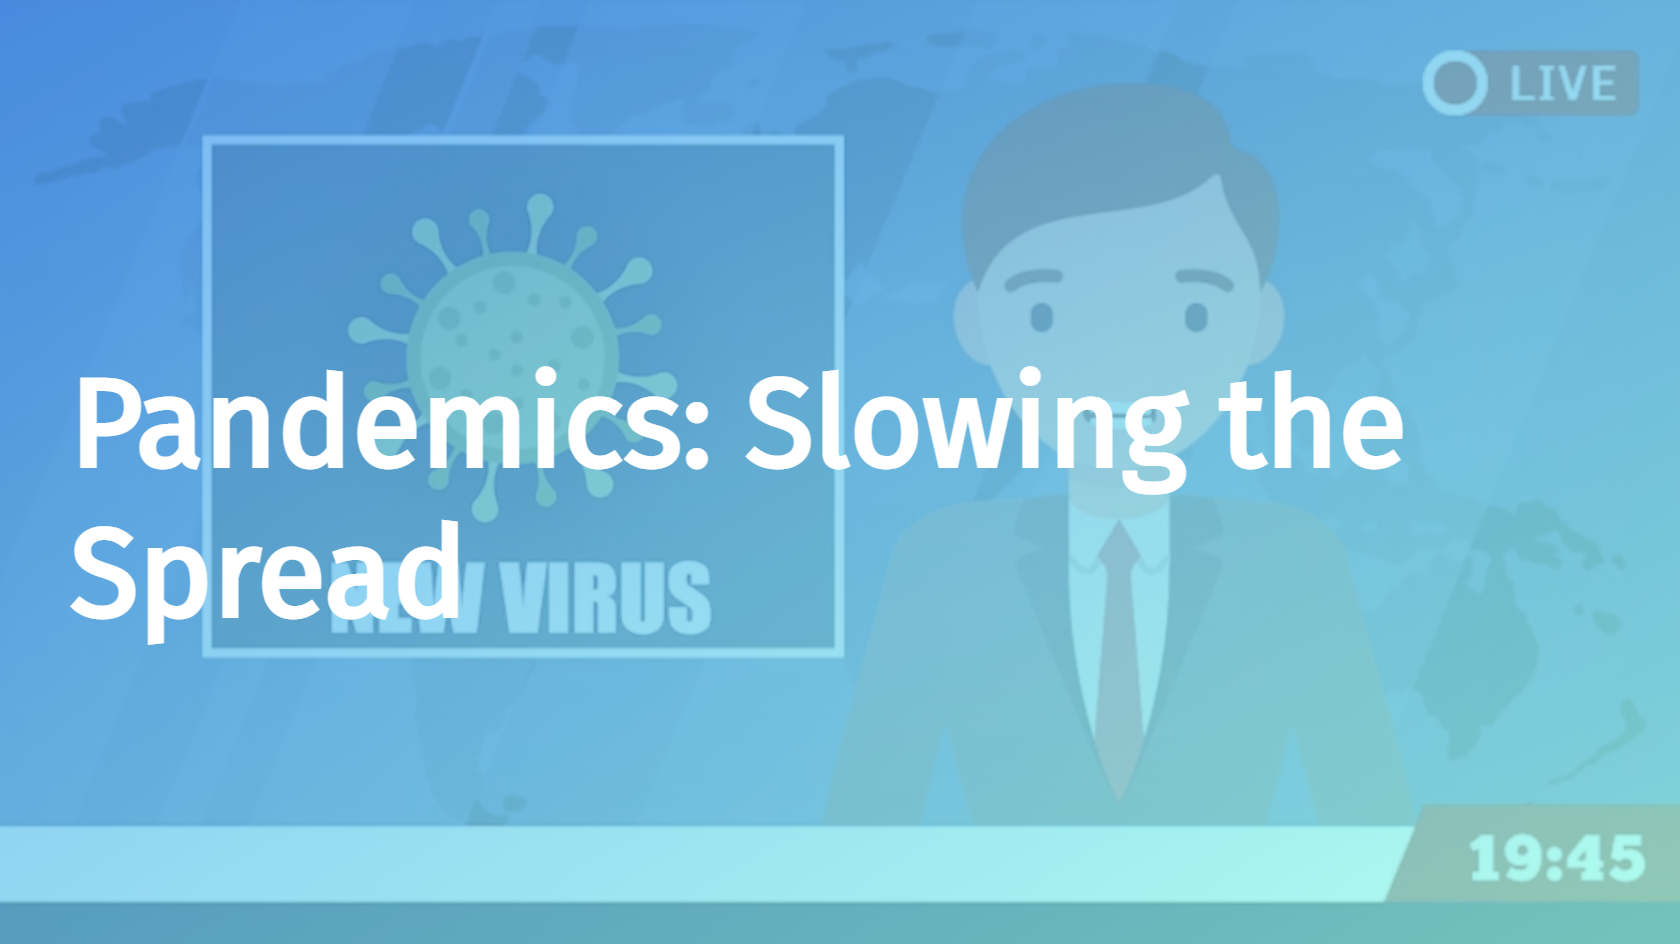 Pandemics: Slowing the Spread